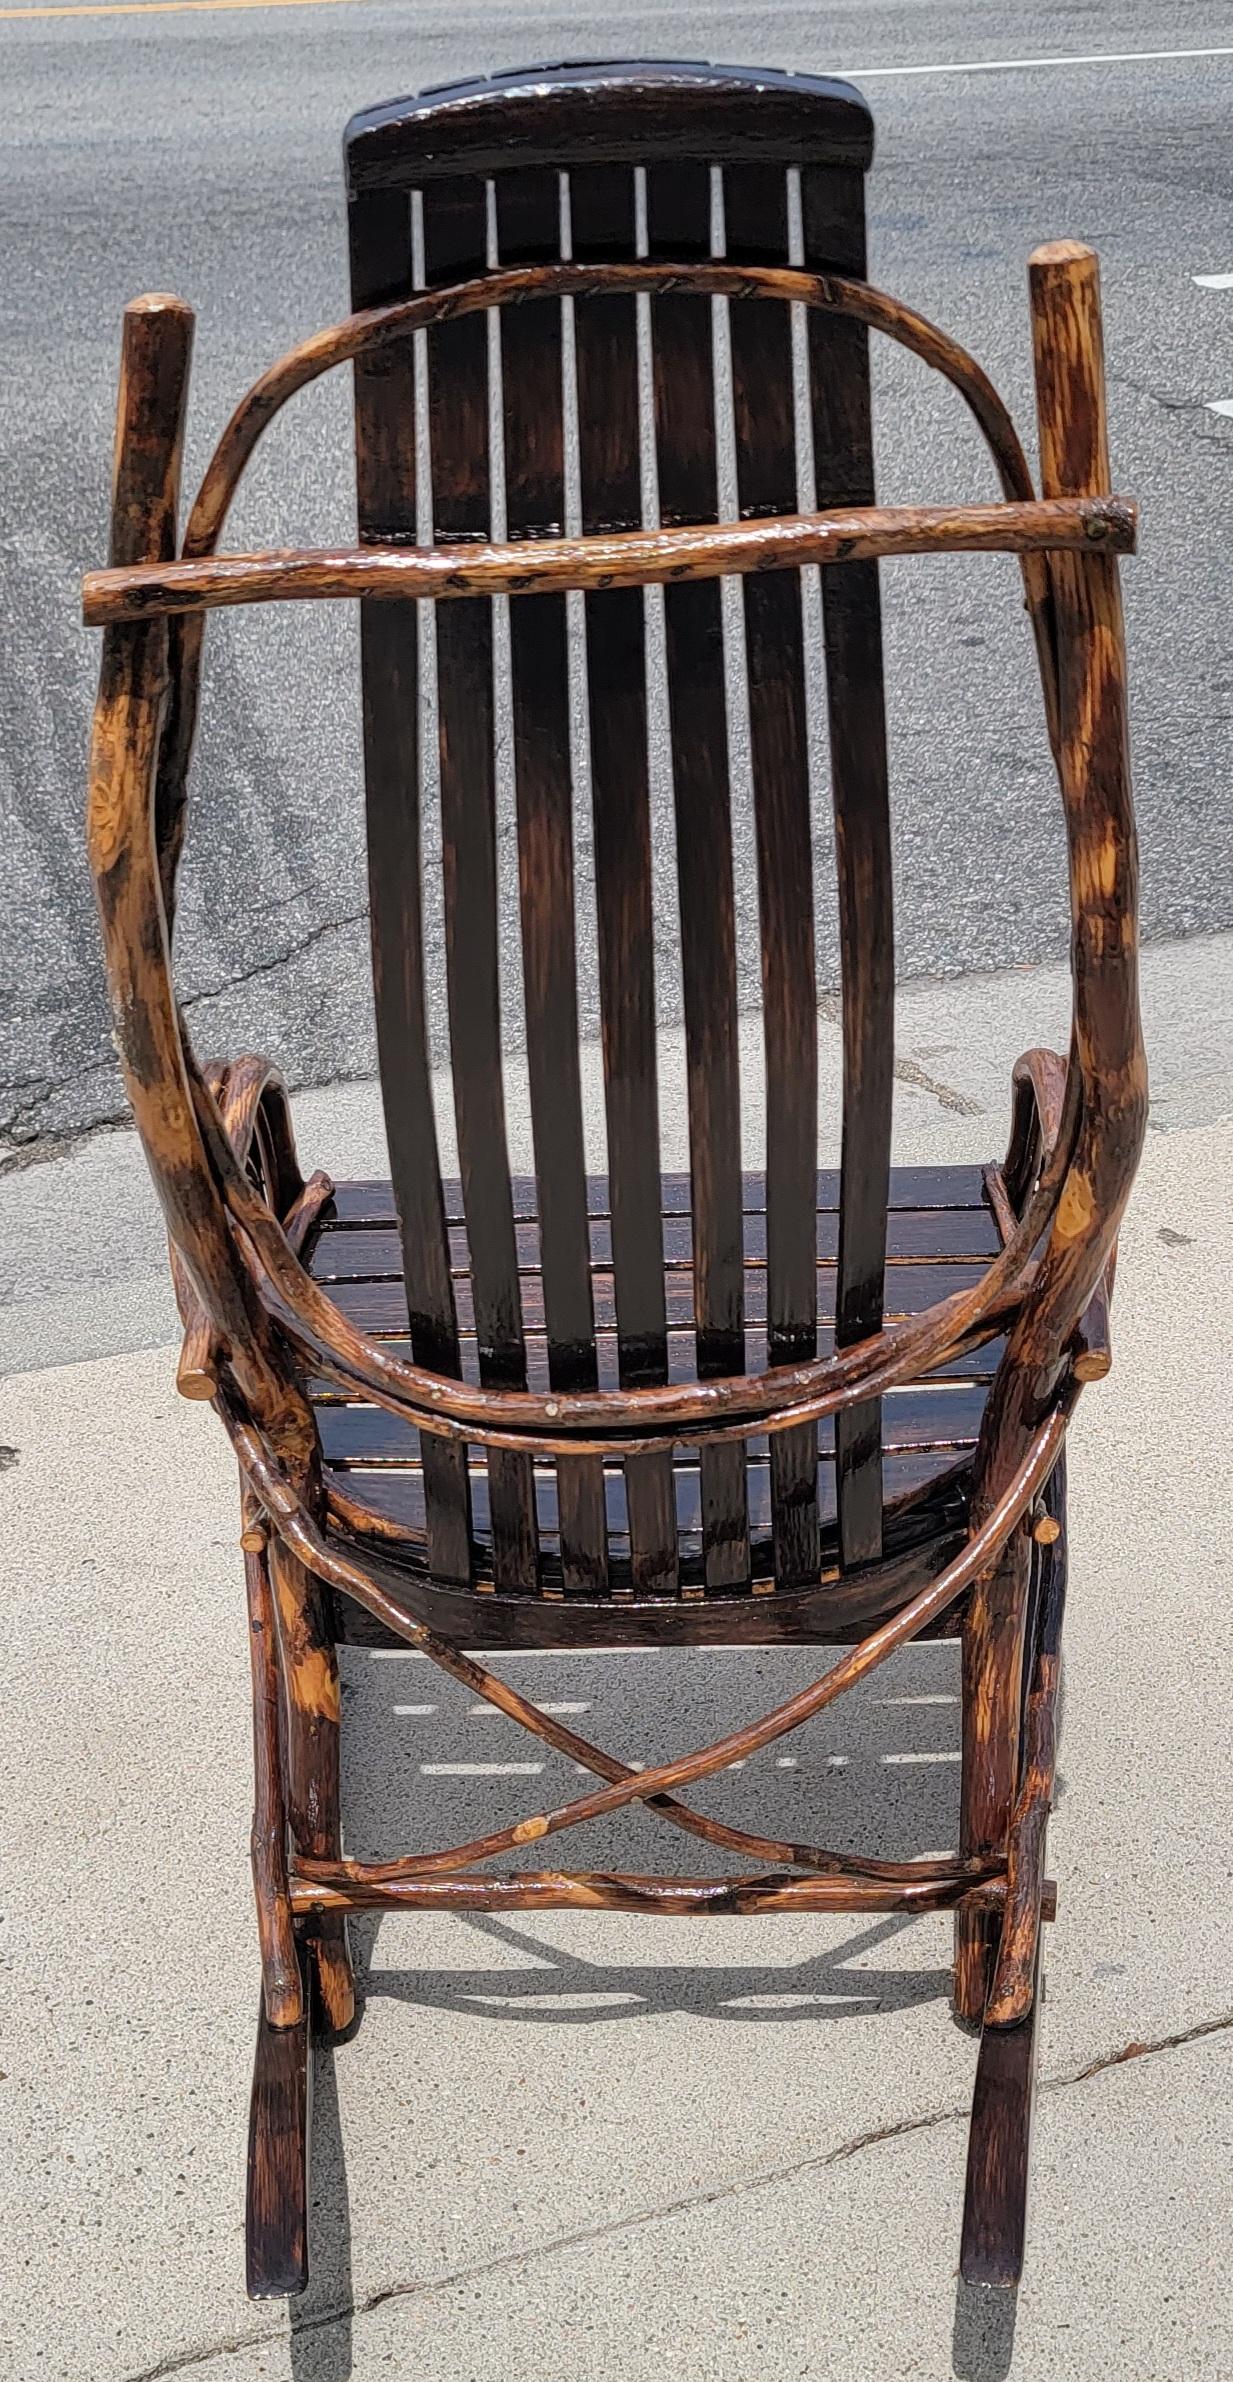 Wood Amish Children's Rocking Chairs From Lancaster, Pa.-3 For Sale